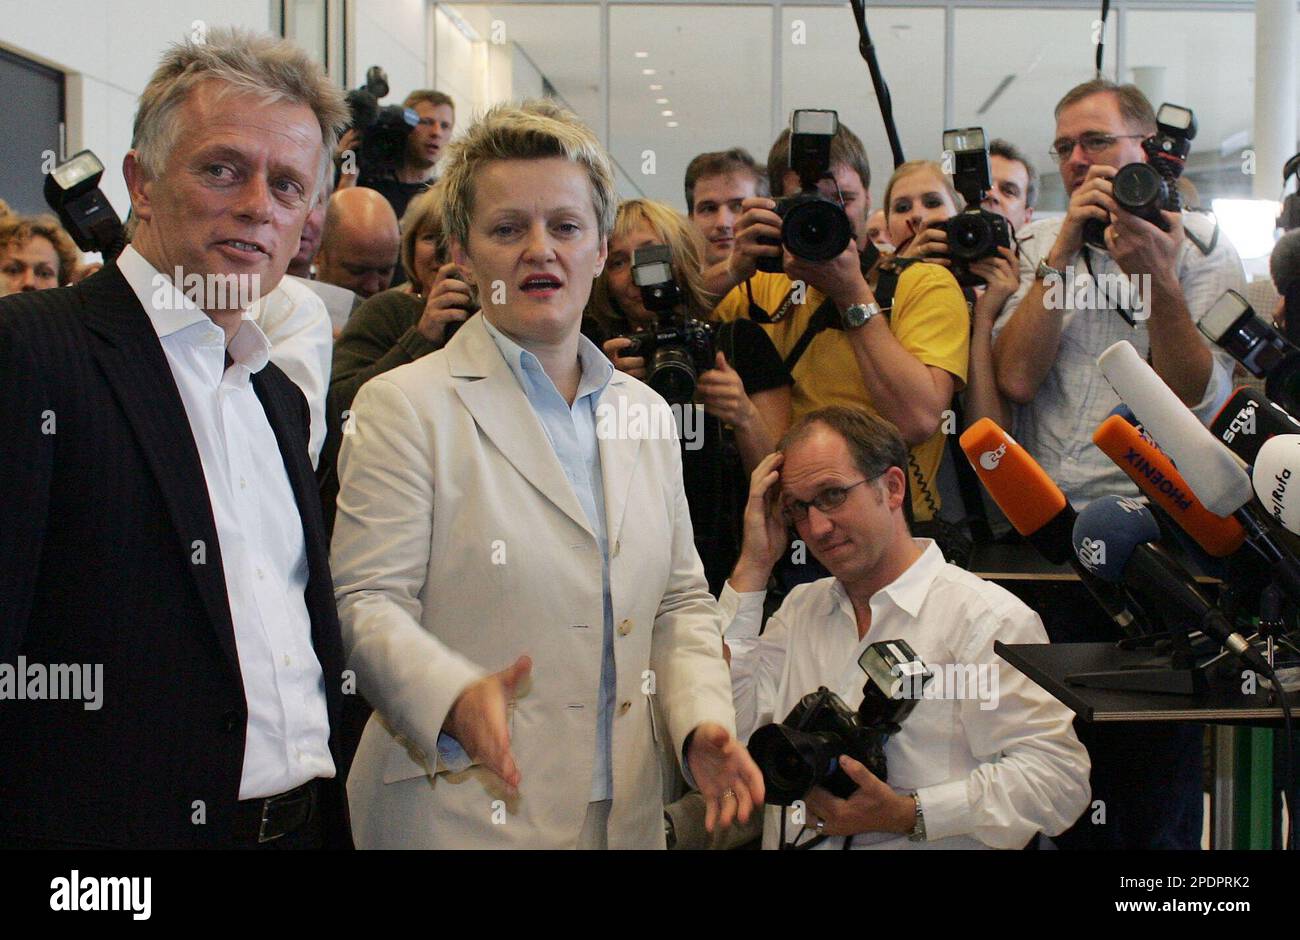 Die Gruenen Fritz Kuhn, links, und Renate Kuenast nach ihrer Wahl zu den neuen Fraktionsvorsitzenden der Gruenen - Bundestagsfraktion im Reichstag in Berlin am Dienstag, 27. September 2005.(AP Photo/Markus Schreiber) --- German Green's Fritz Kuhn, left, and Renate Kuenast pose for media after they were elected as new faction leader in Berlin on Tuesday, Sept. 27, 2005. The Greens, seeking to maintain a high profile as they prepare for opposition, on Tuesday chose a combative outgoing minister and a respected former party chairman to lead them in parliament.(AP Photo/Markus Schreiber) Banque D'Images